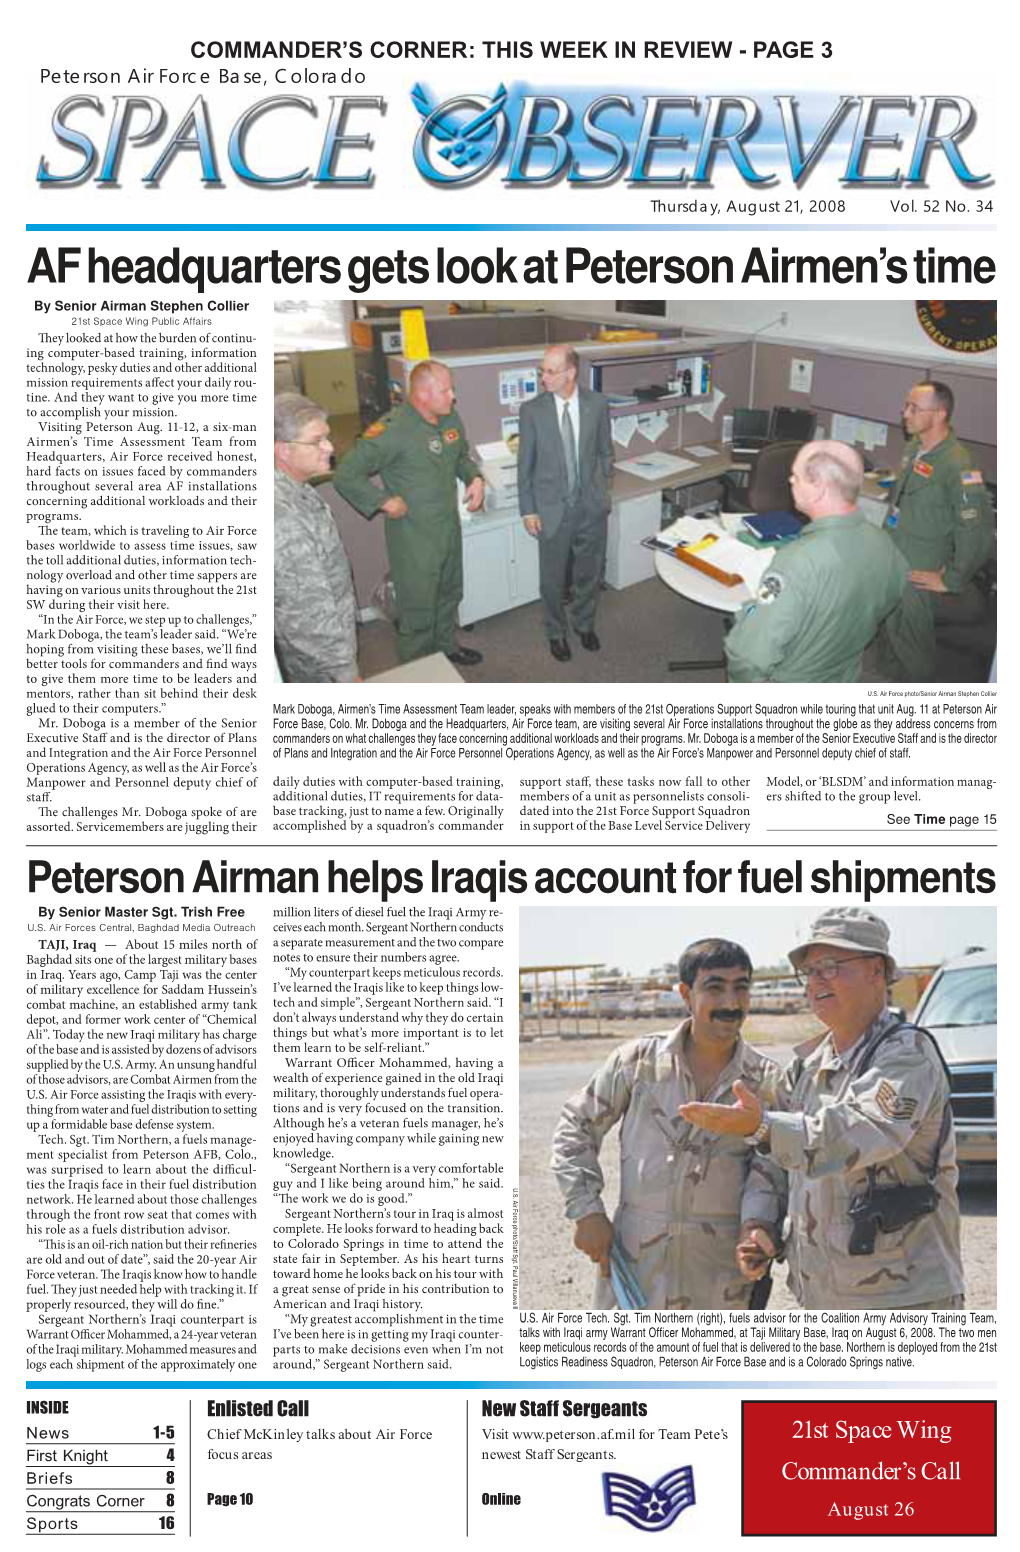 AF Headquarters Gets Look at Peterson Airmen's Time